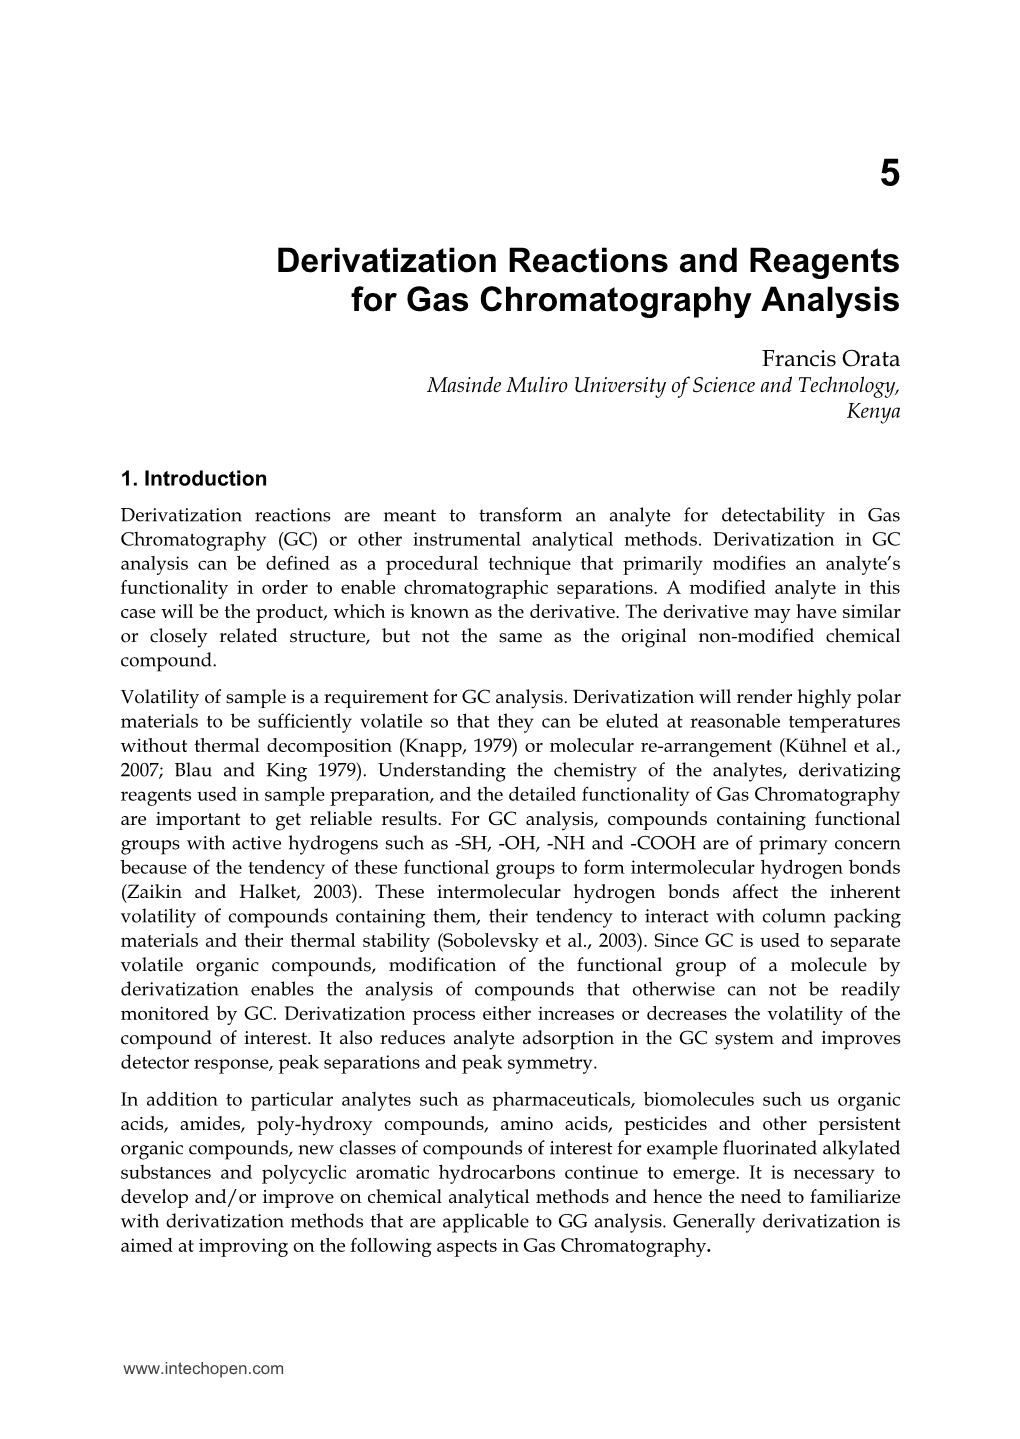 Derivatization Reactions and Reagents for Gas Chromatography Analysis